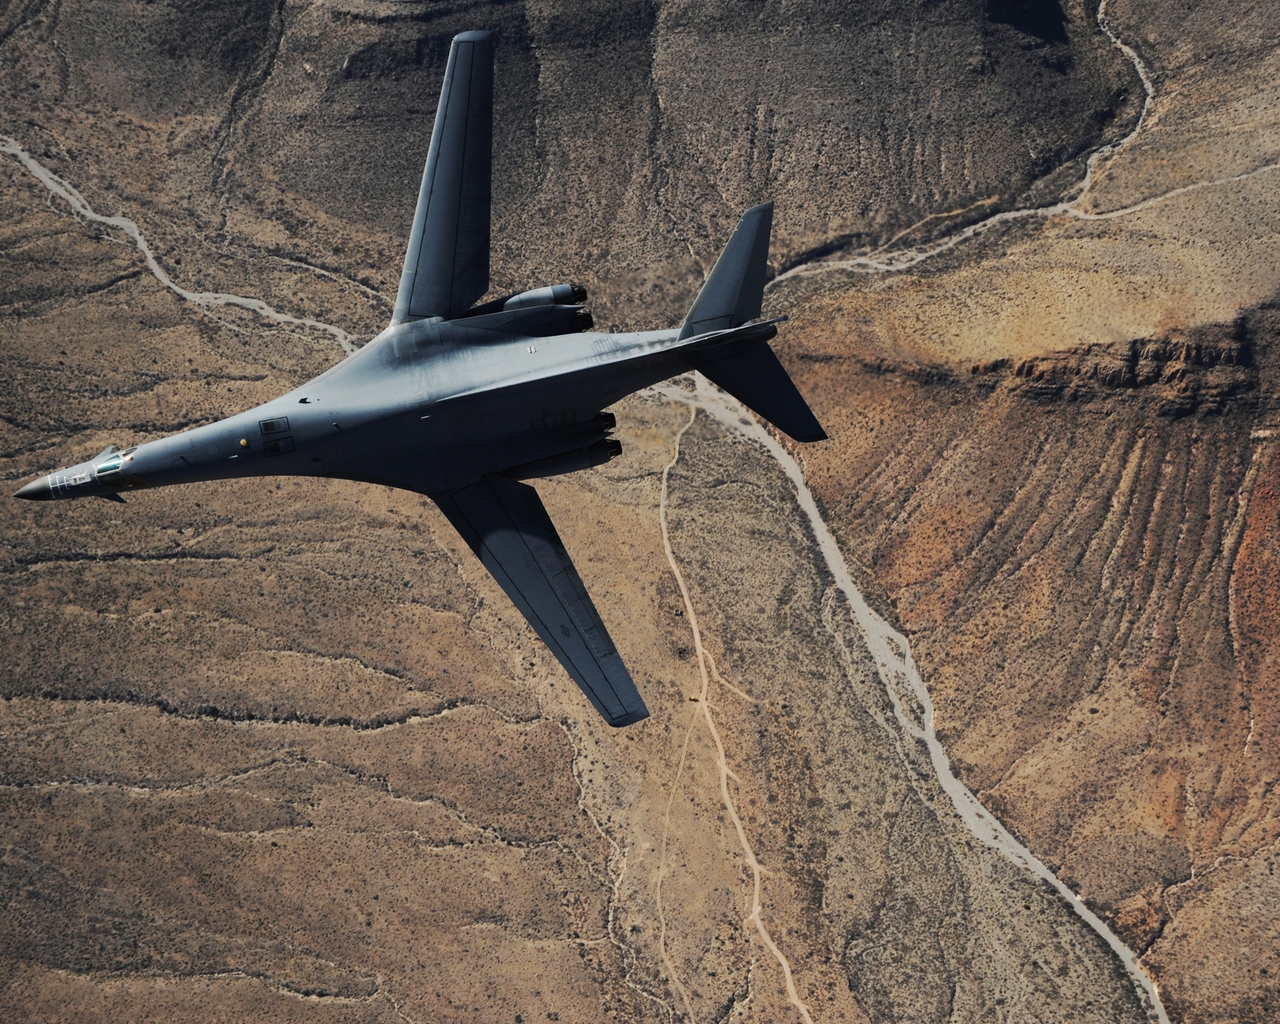 Rockwell B1 Lancer for 1280 x 1024 resolution